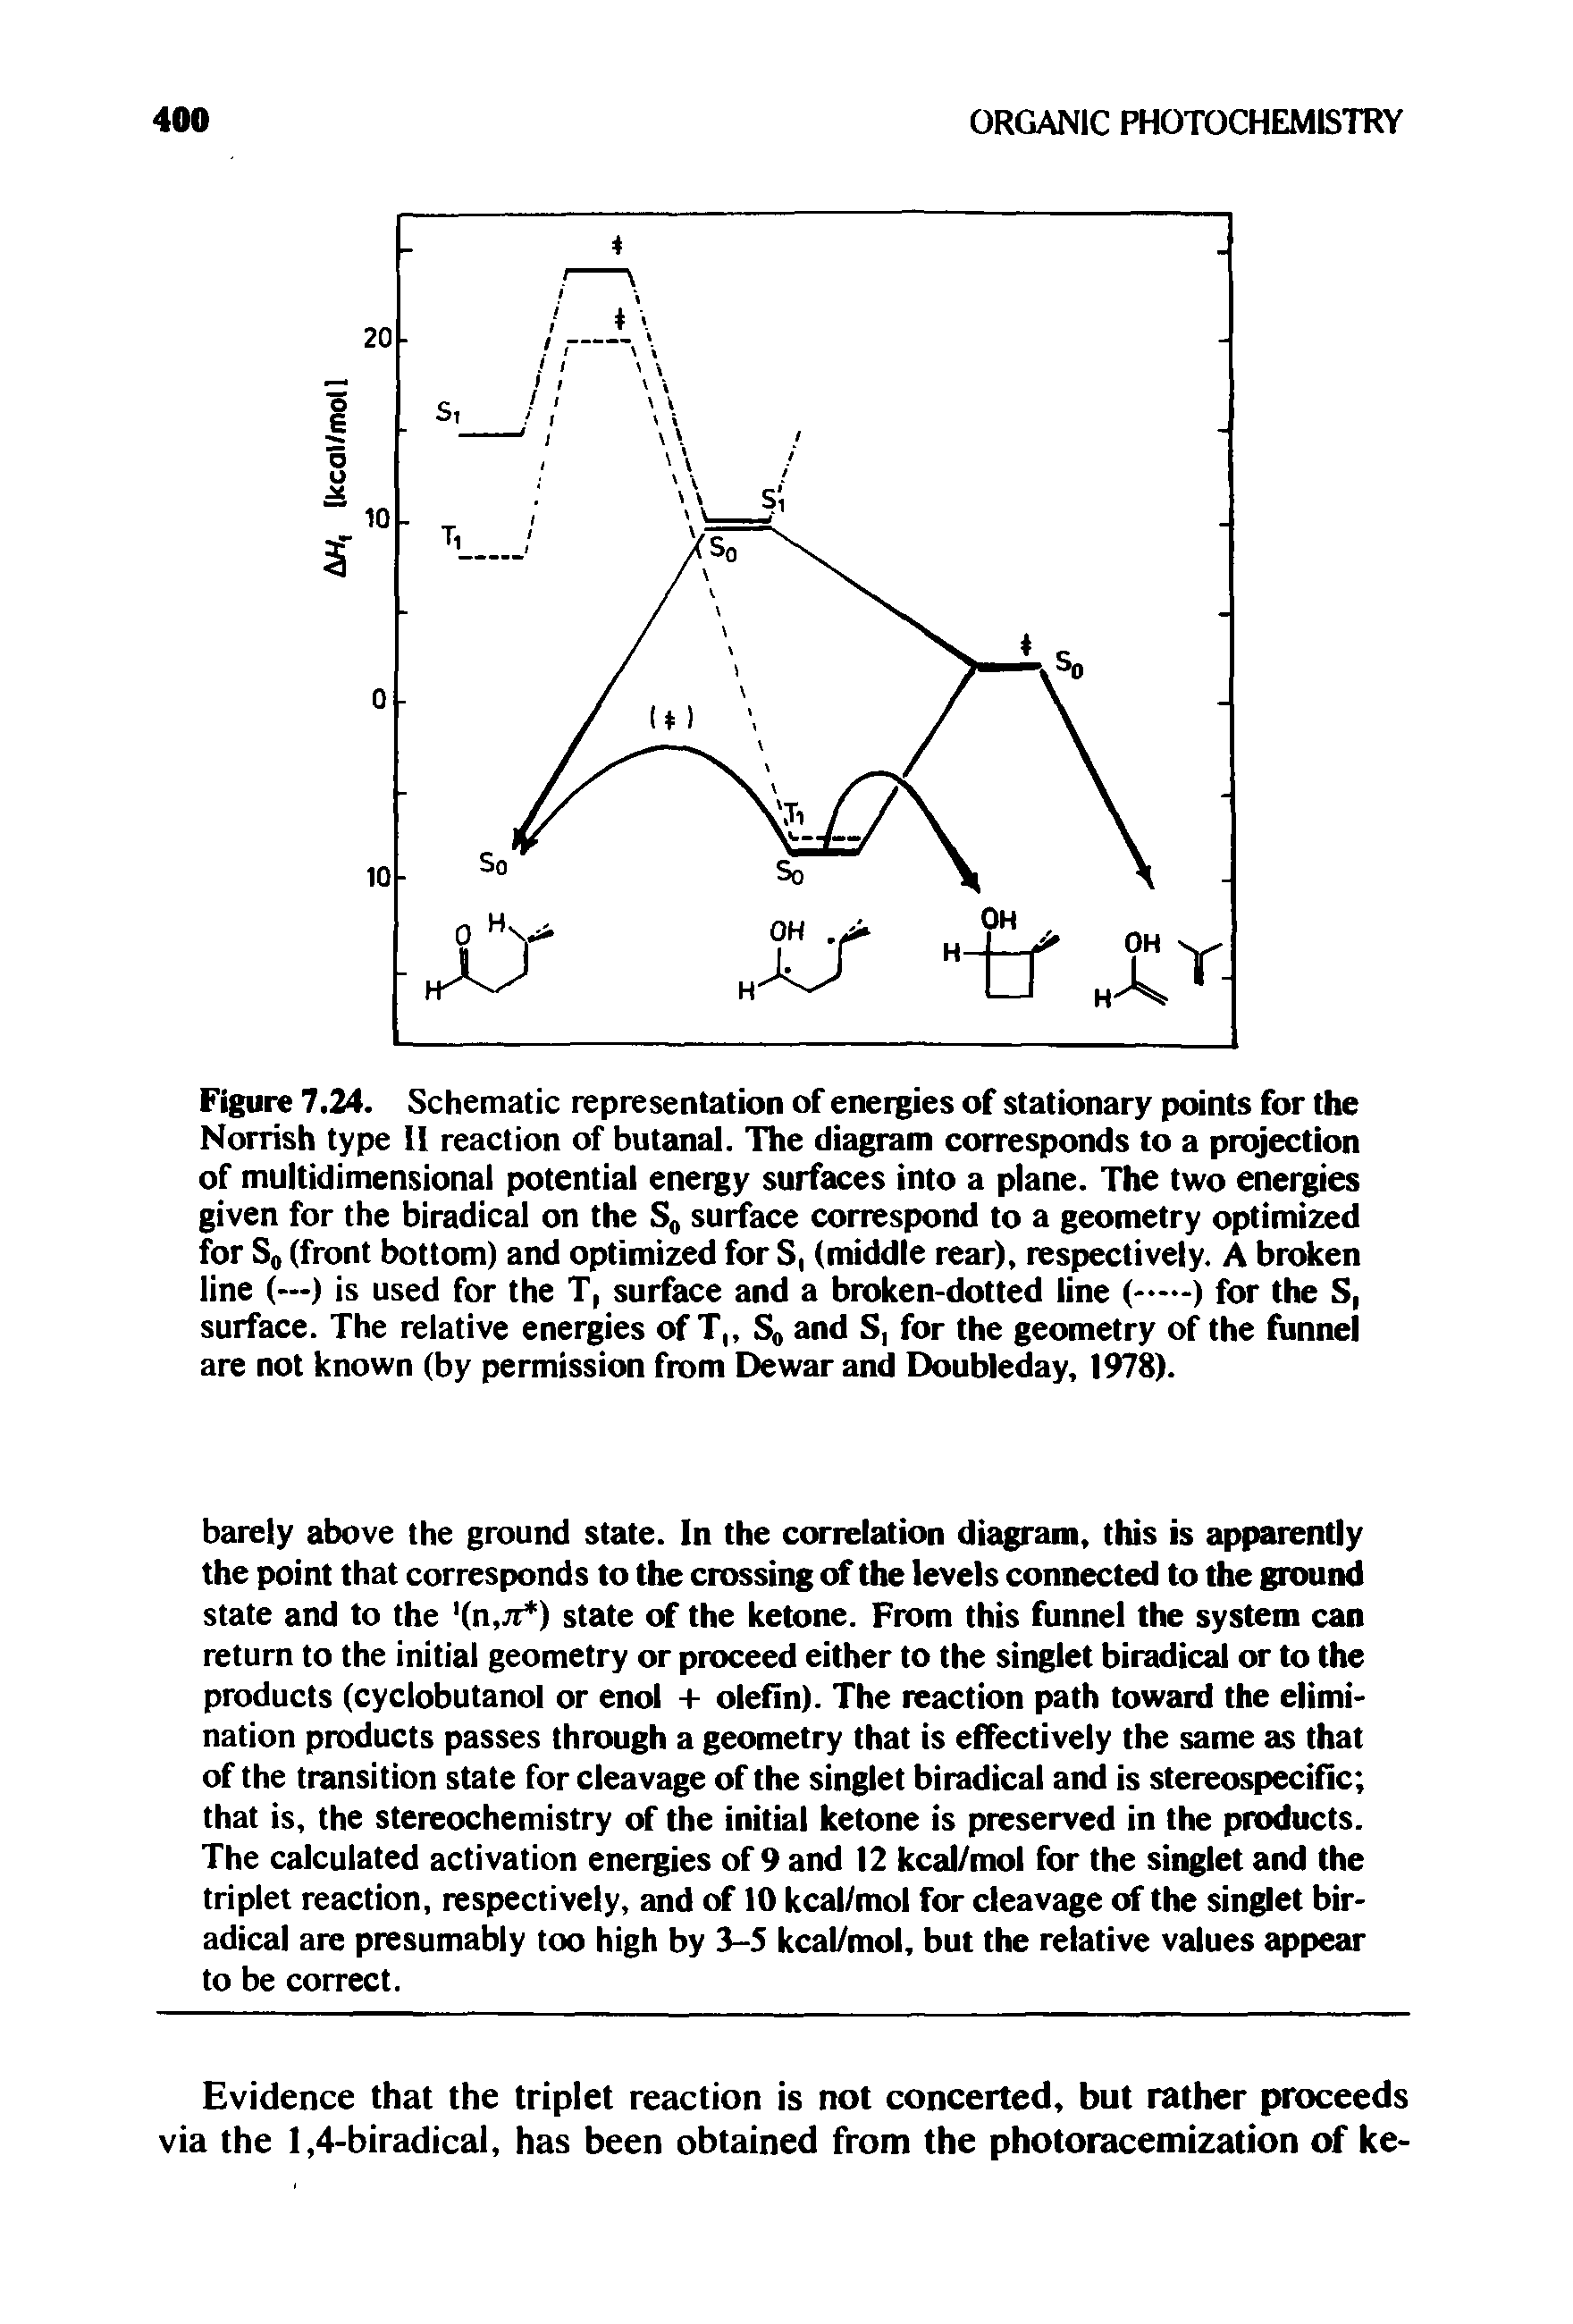 Figure 7.24. Schematic representation of energies of stationary points for the Norrish type 11 reaction of butanal. The diagram corresponds to a projection of multidimensional potential energy surfaces into a plane. The two energies given for the biradical on the S, suiface correspond to a geometry optimized for So (front bottom) and optimized for S, (middle rear), respectively. A broken...